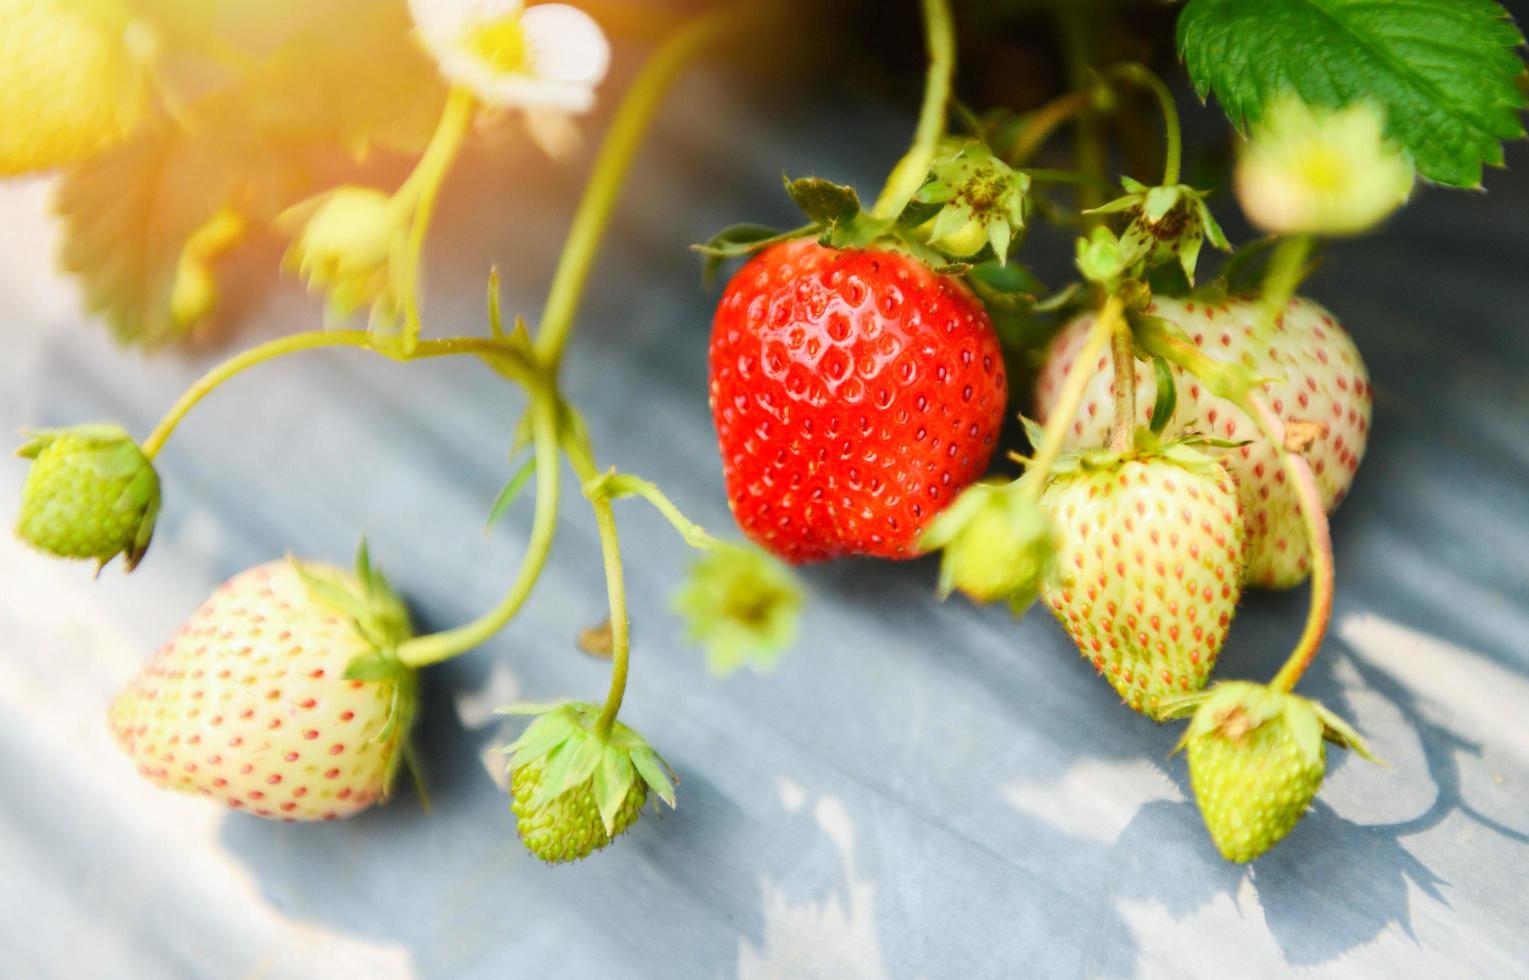 strawberries fruit growing in the strawberry field with green leaf in the garden - plant tree strawberries farm agriculture concept photo